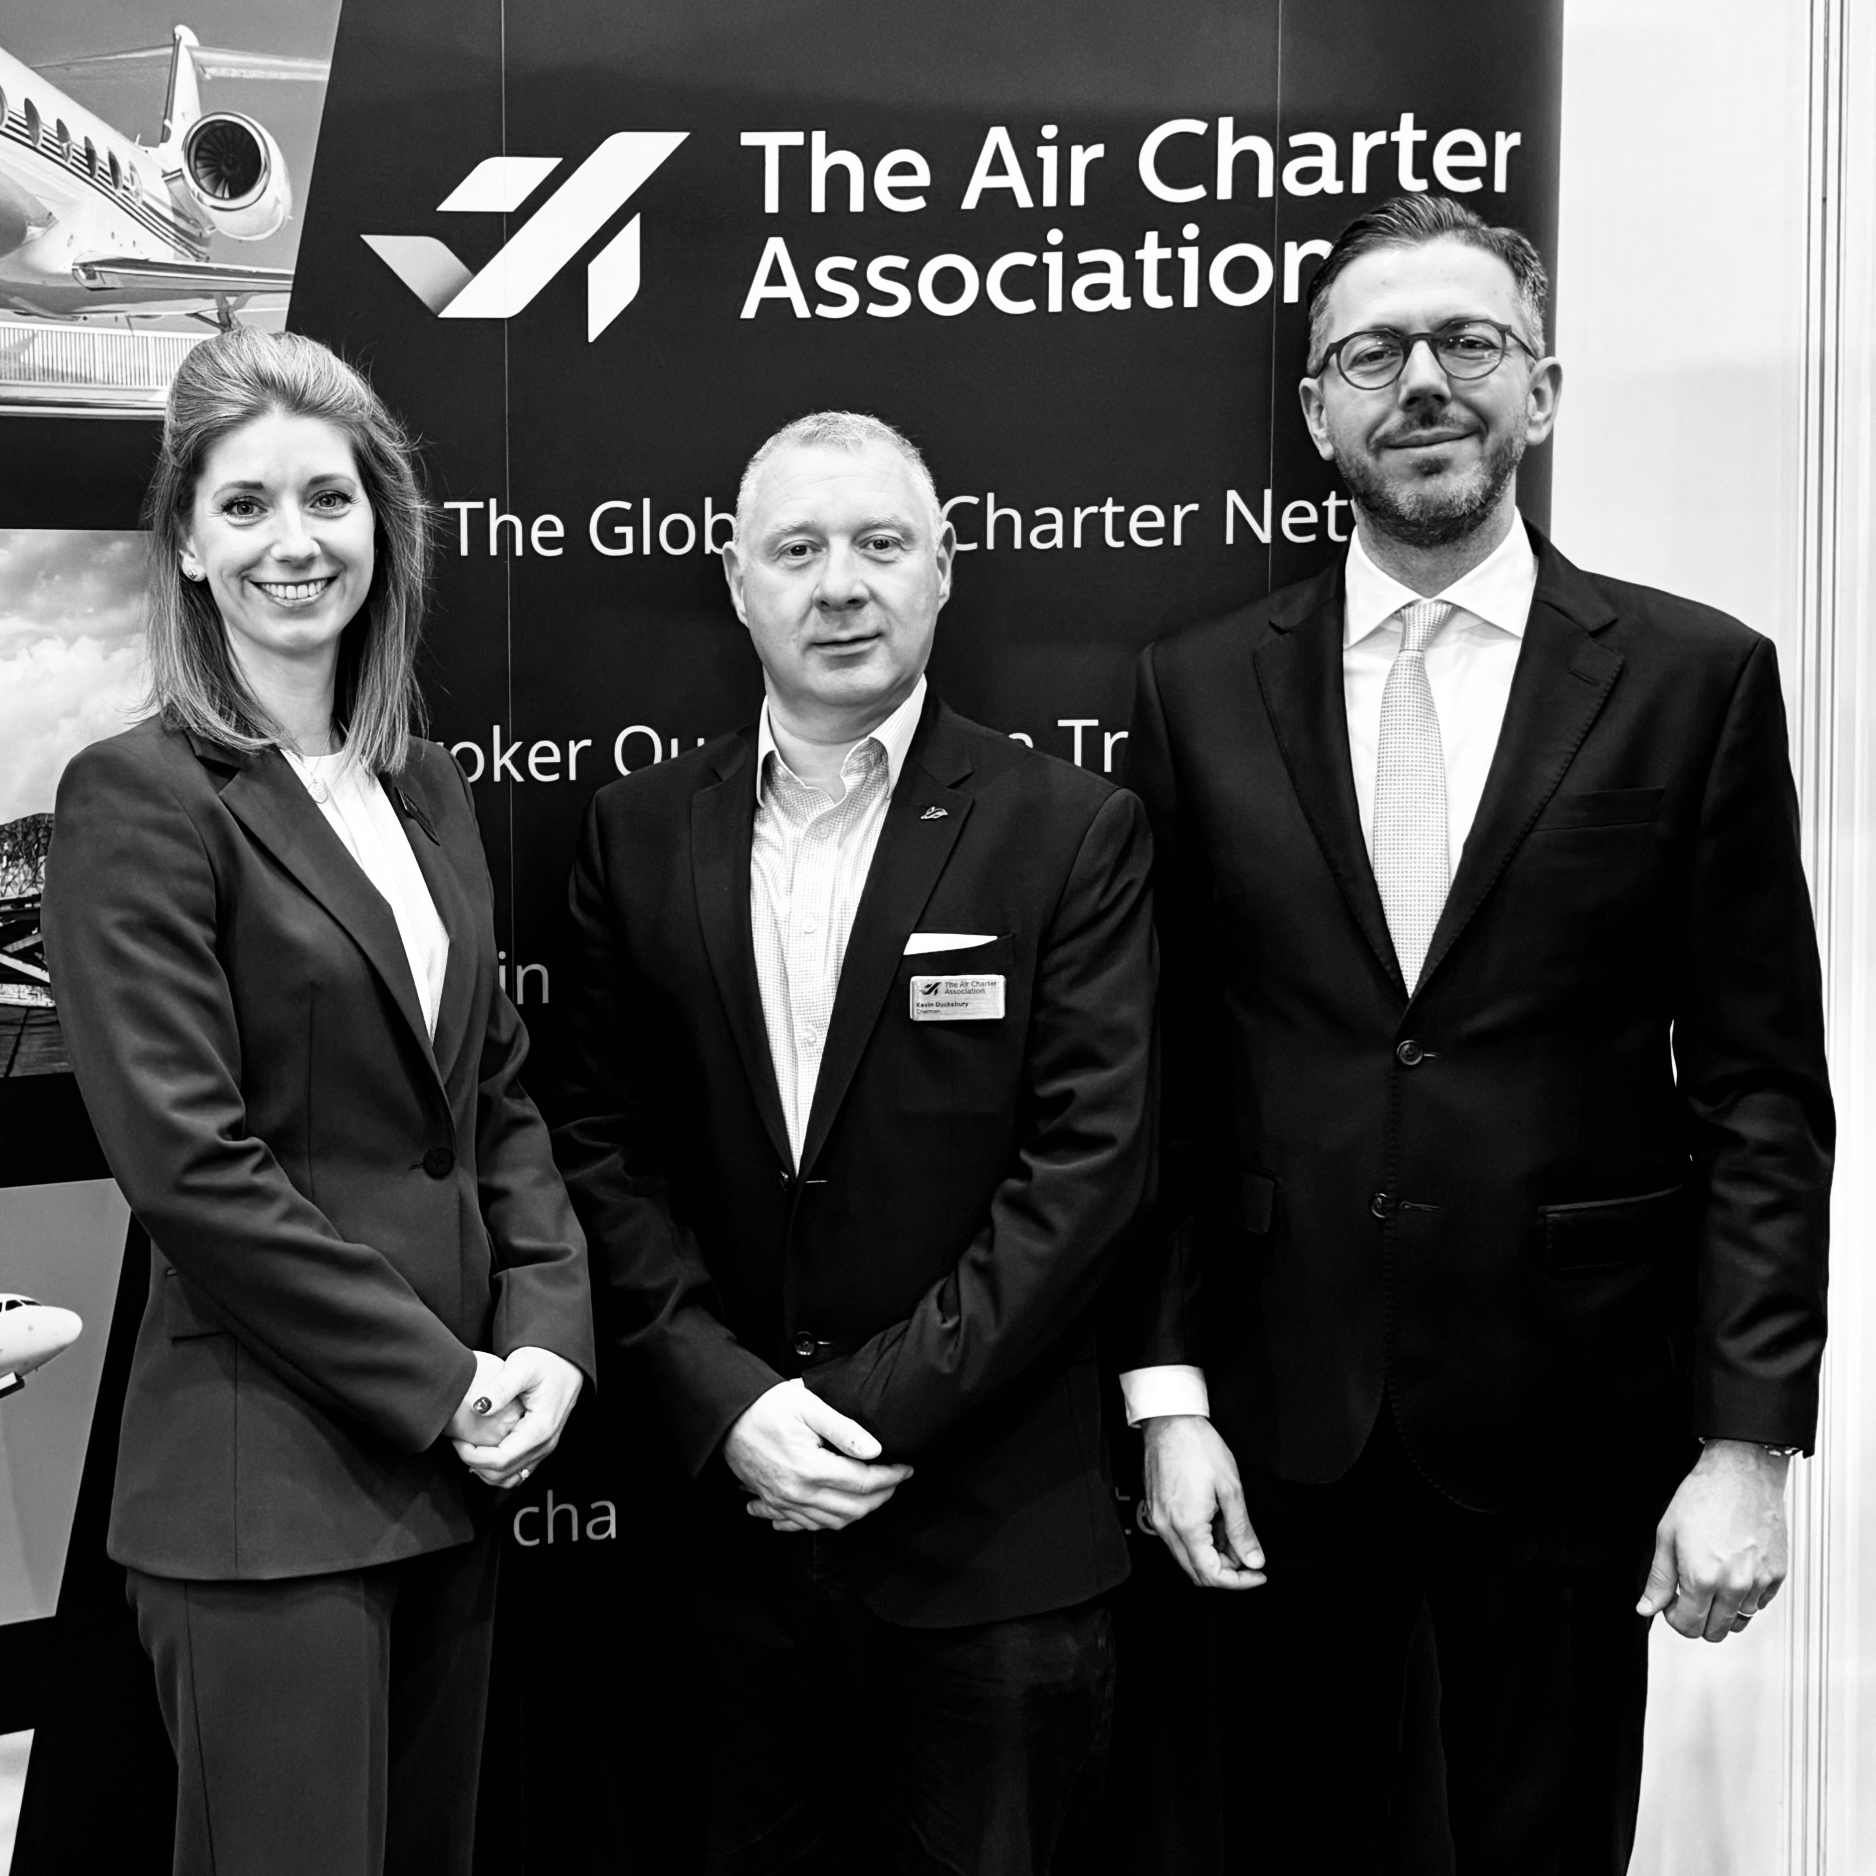 MJET Joins The Air Charter Association